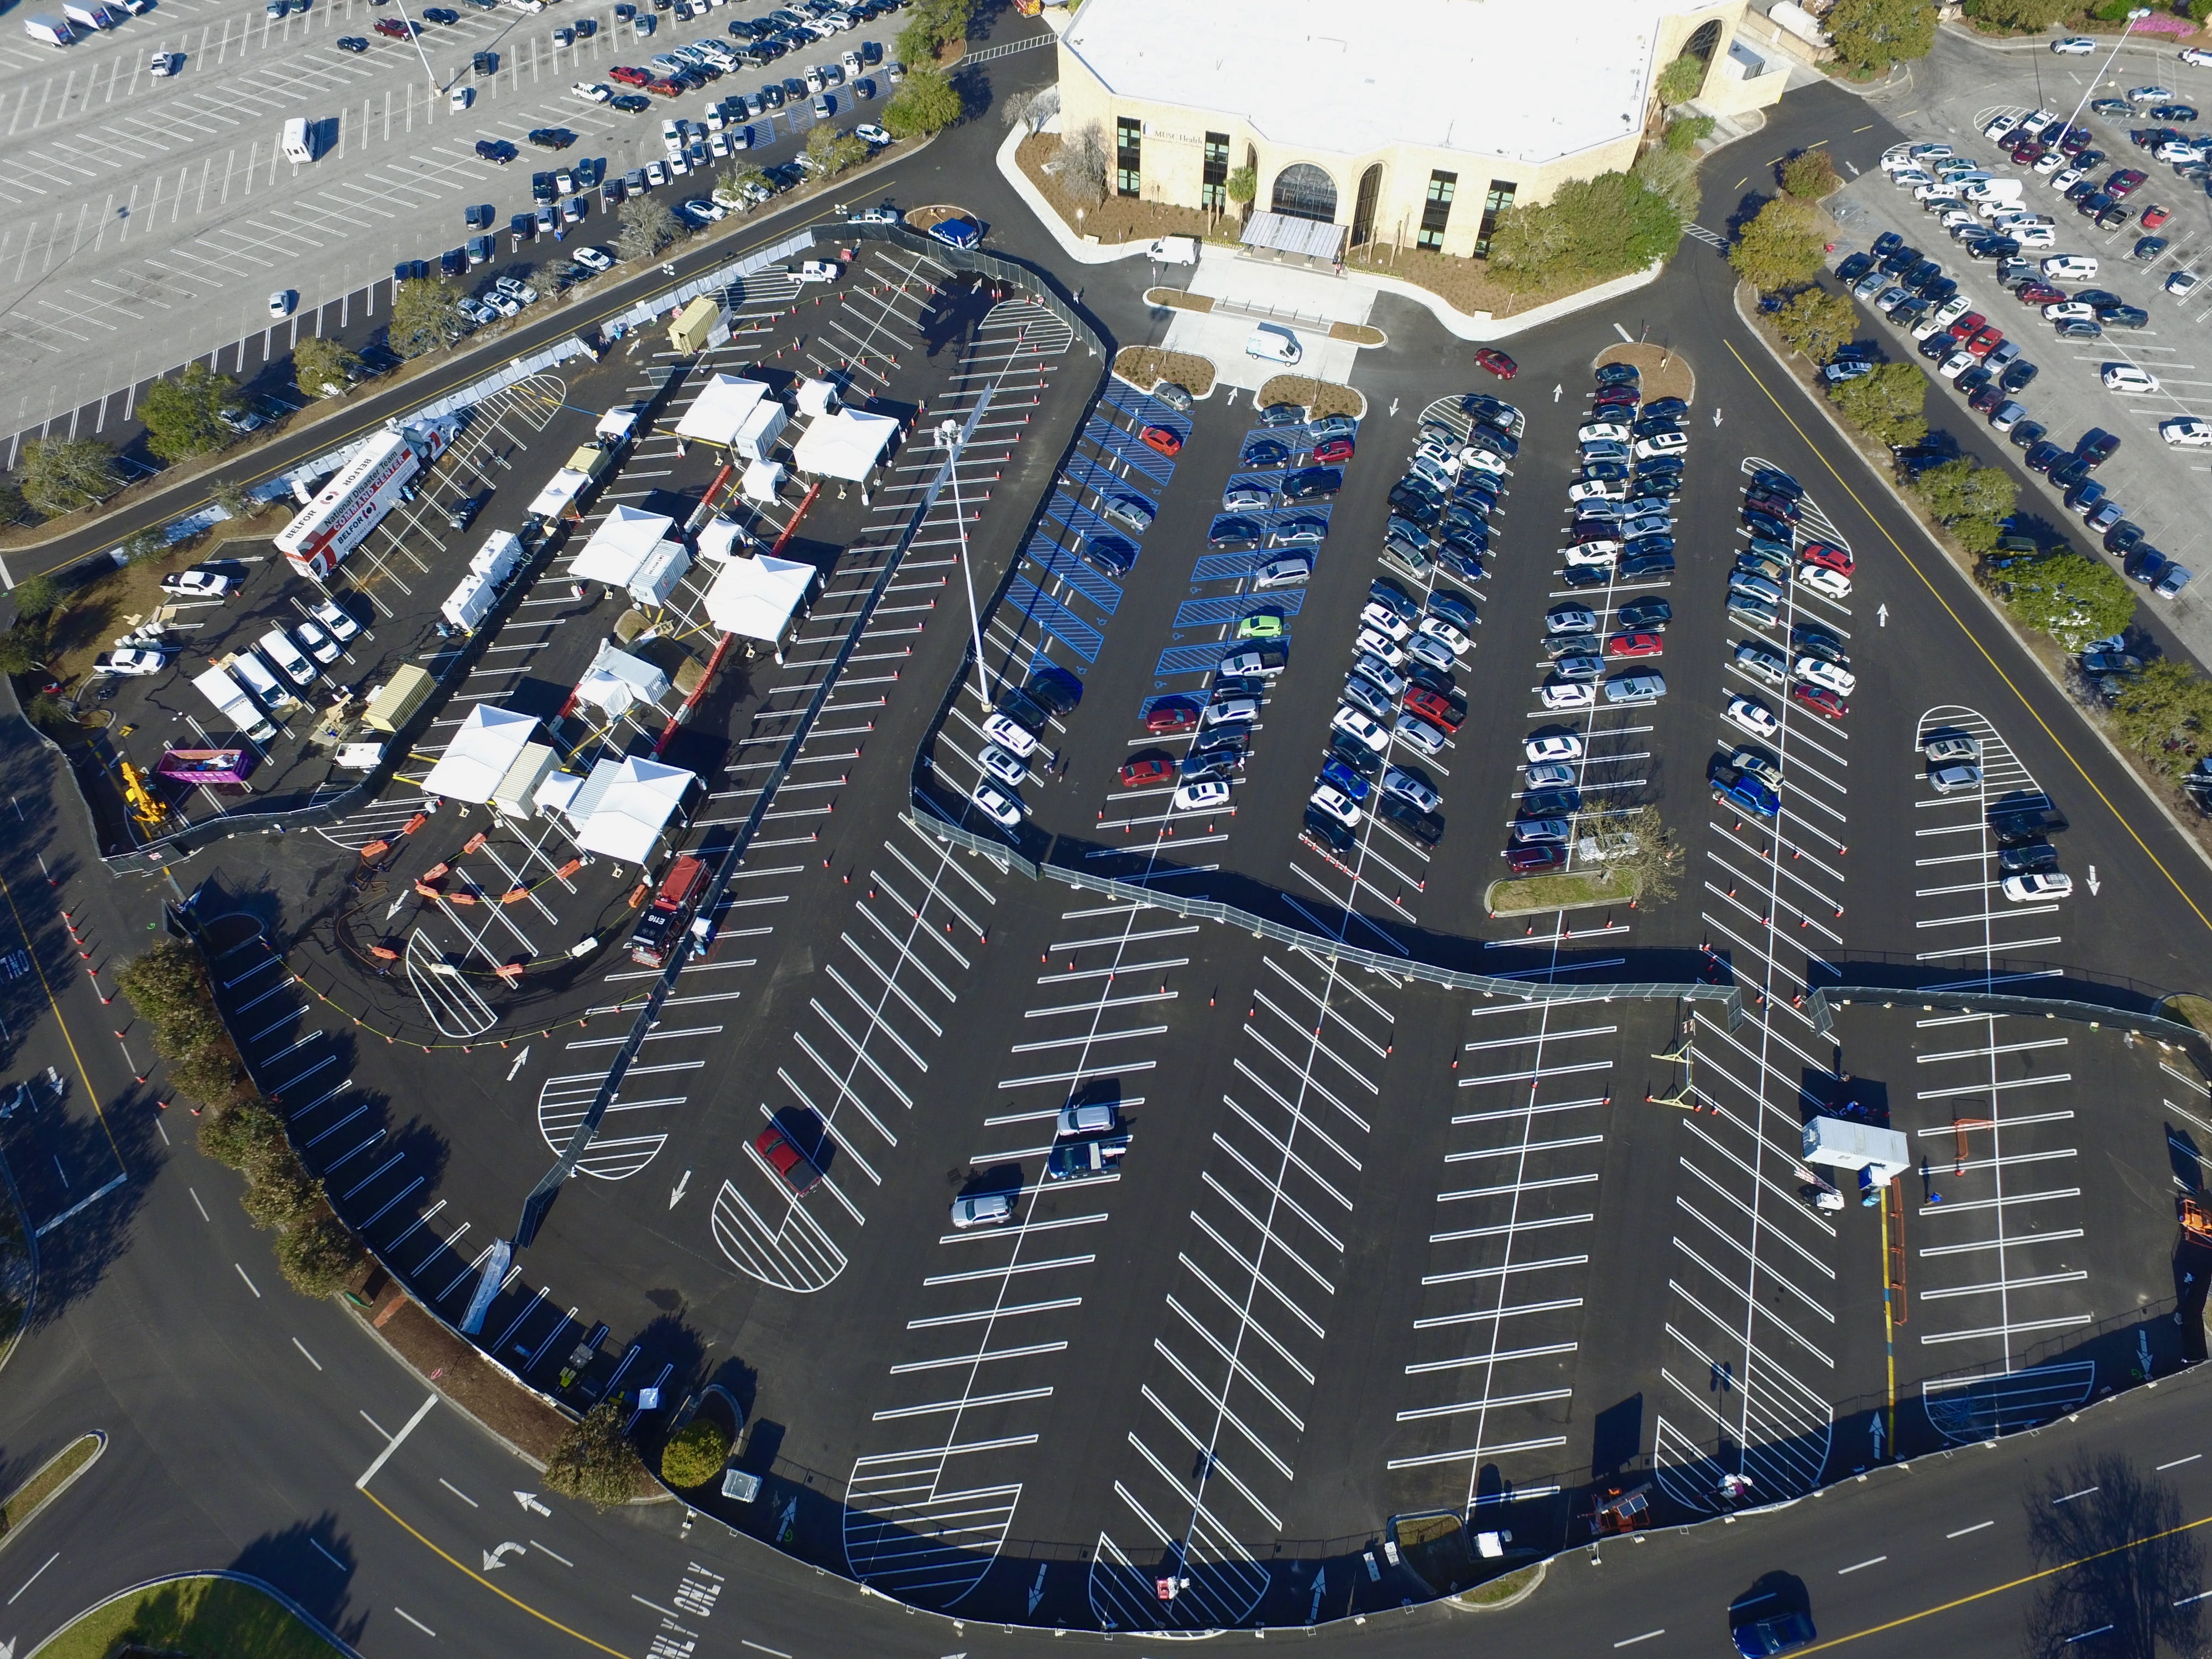 Aerial image of fenced-off respiratory specimen collection site